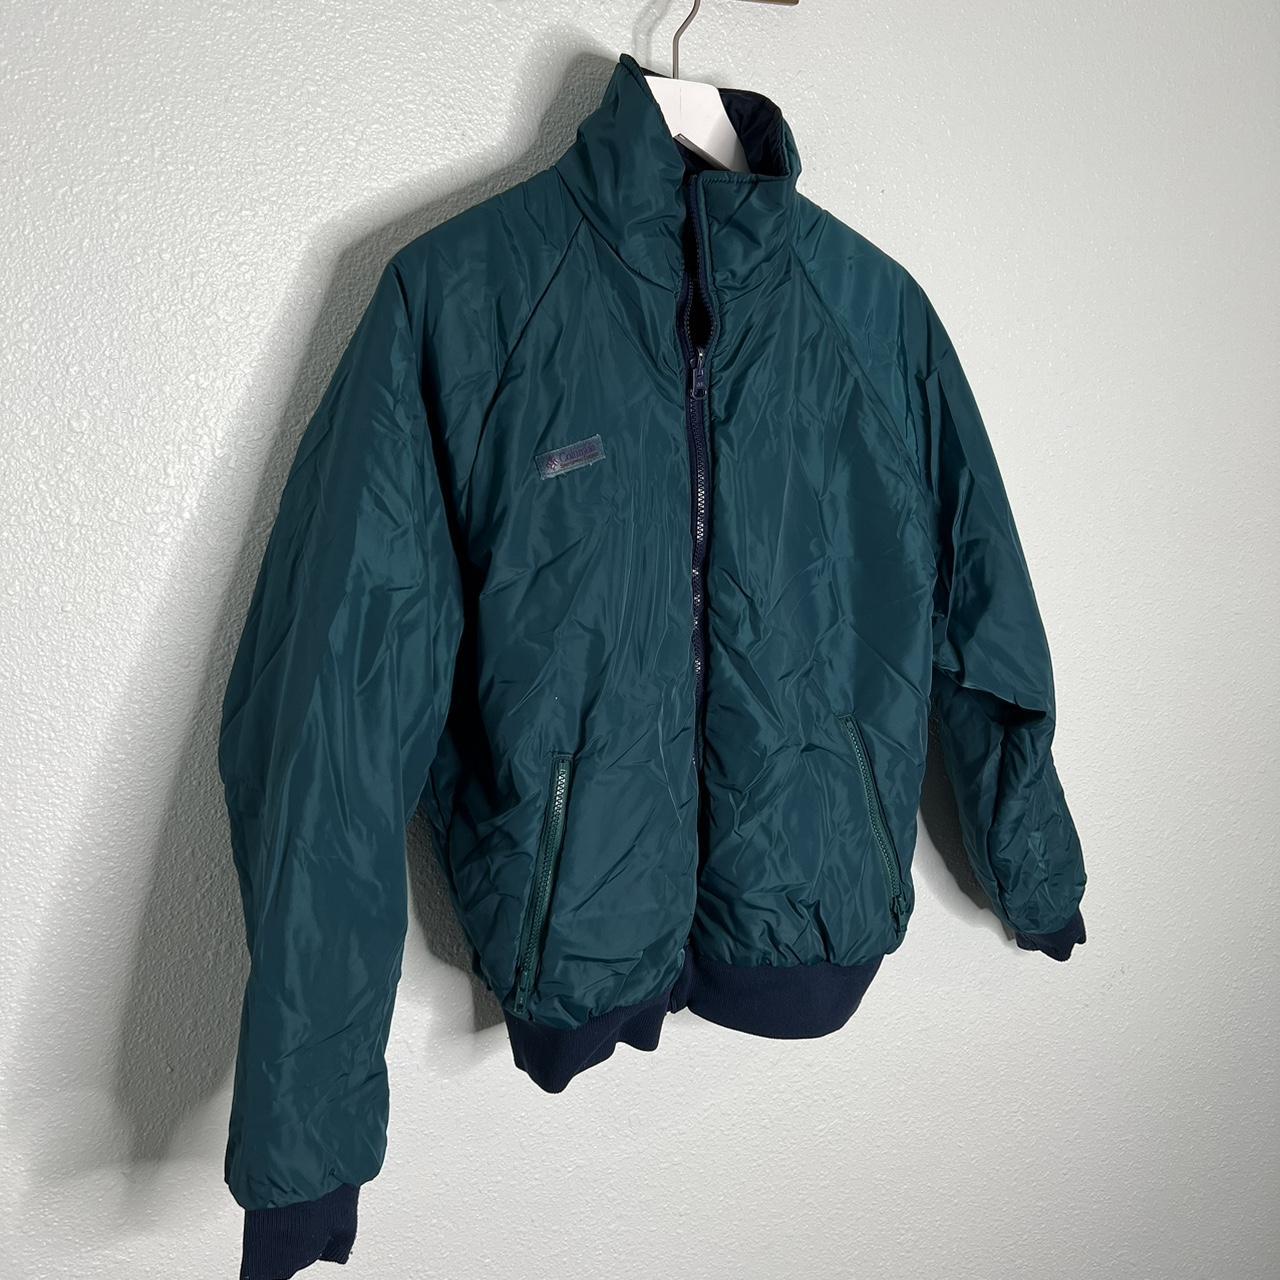 Vintage 90s Columbia Teal And Navy Reversible Bomber...